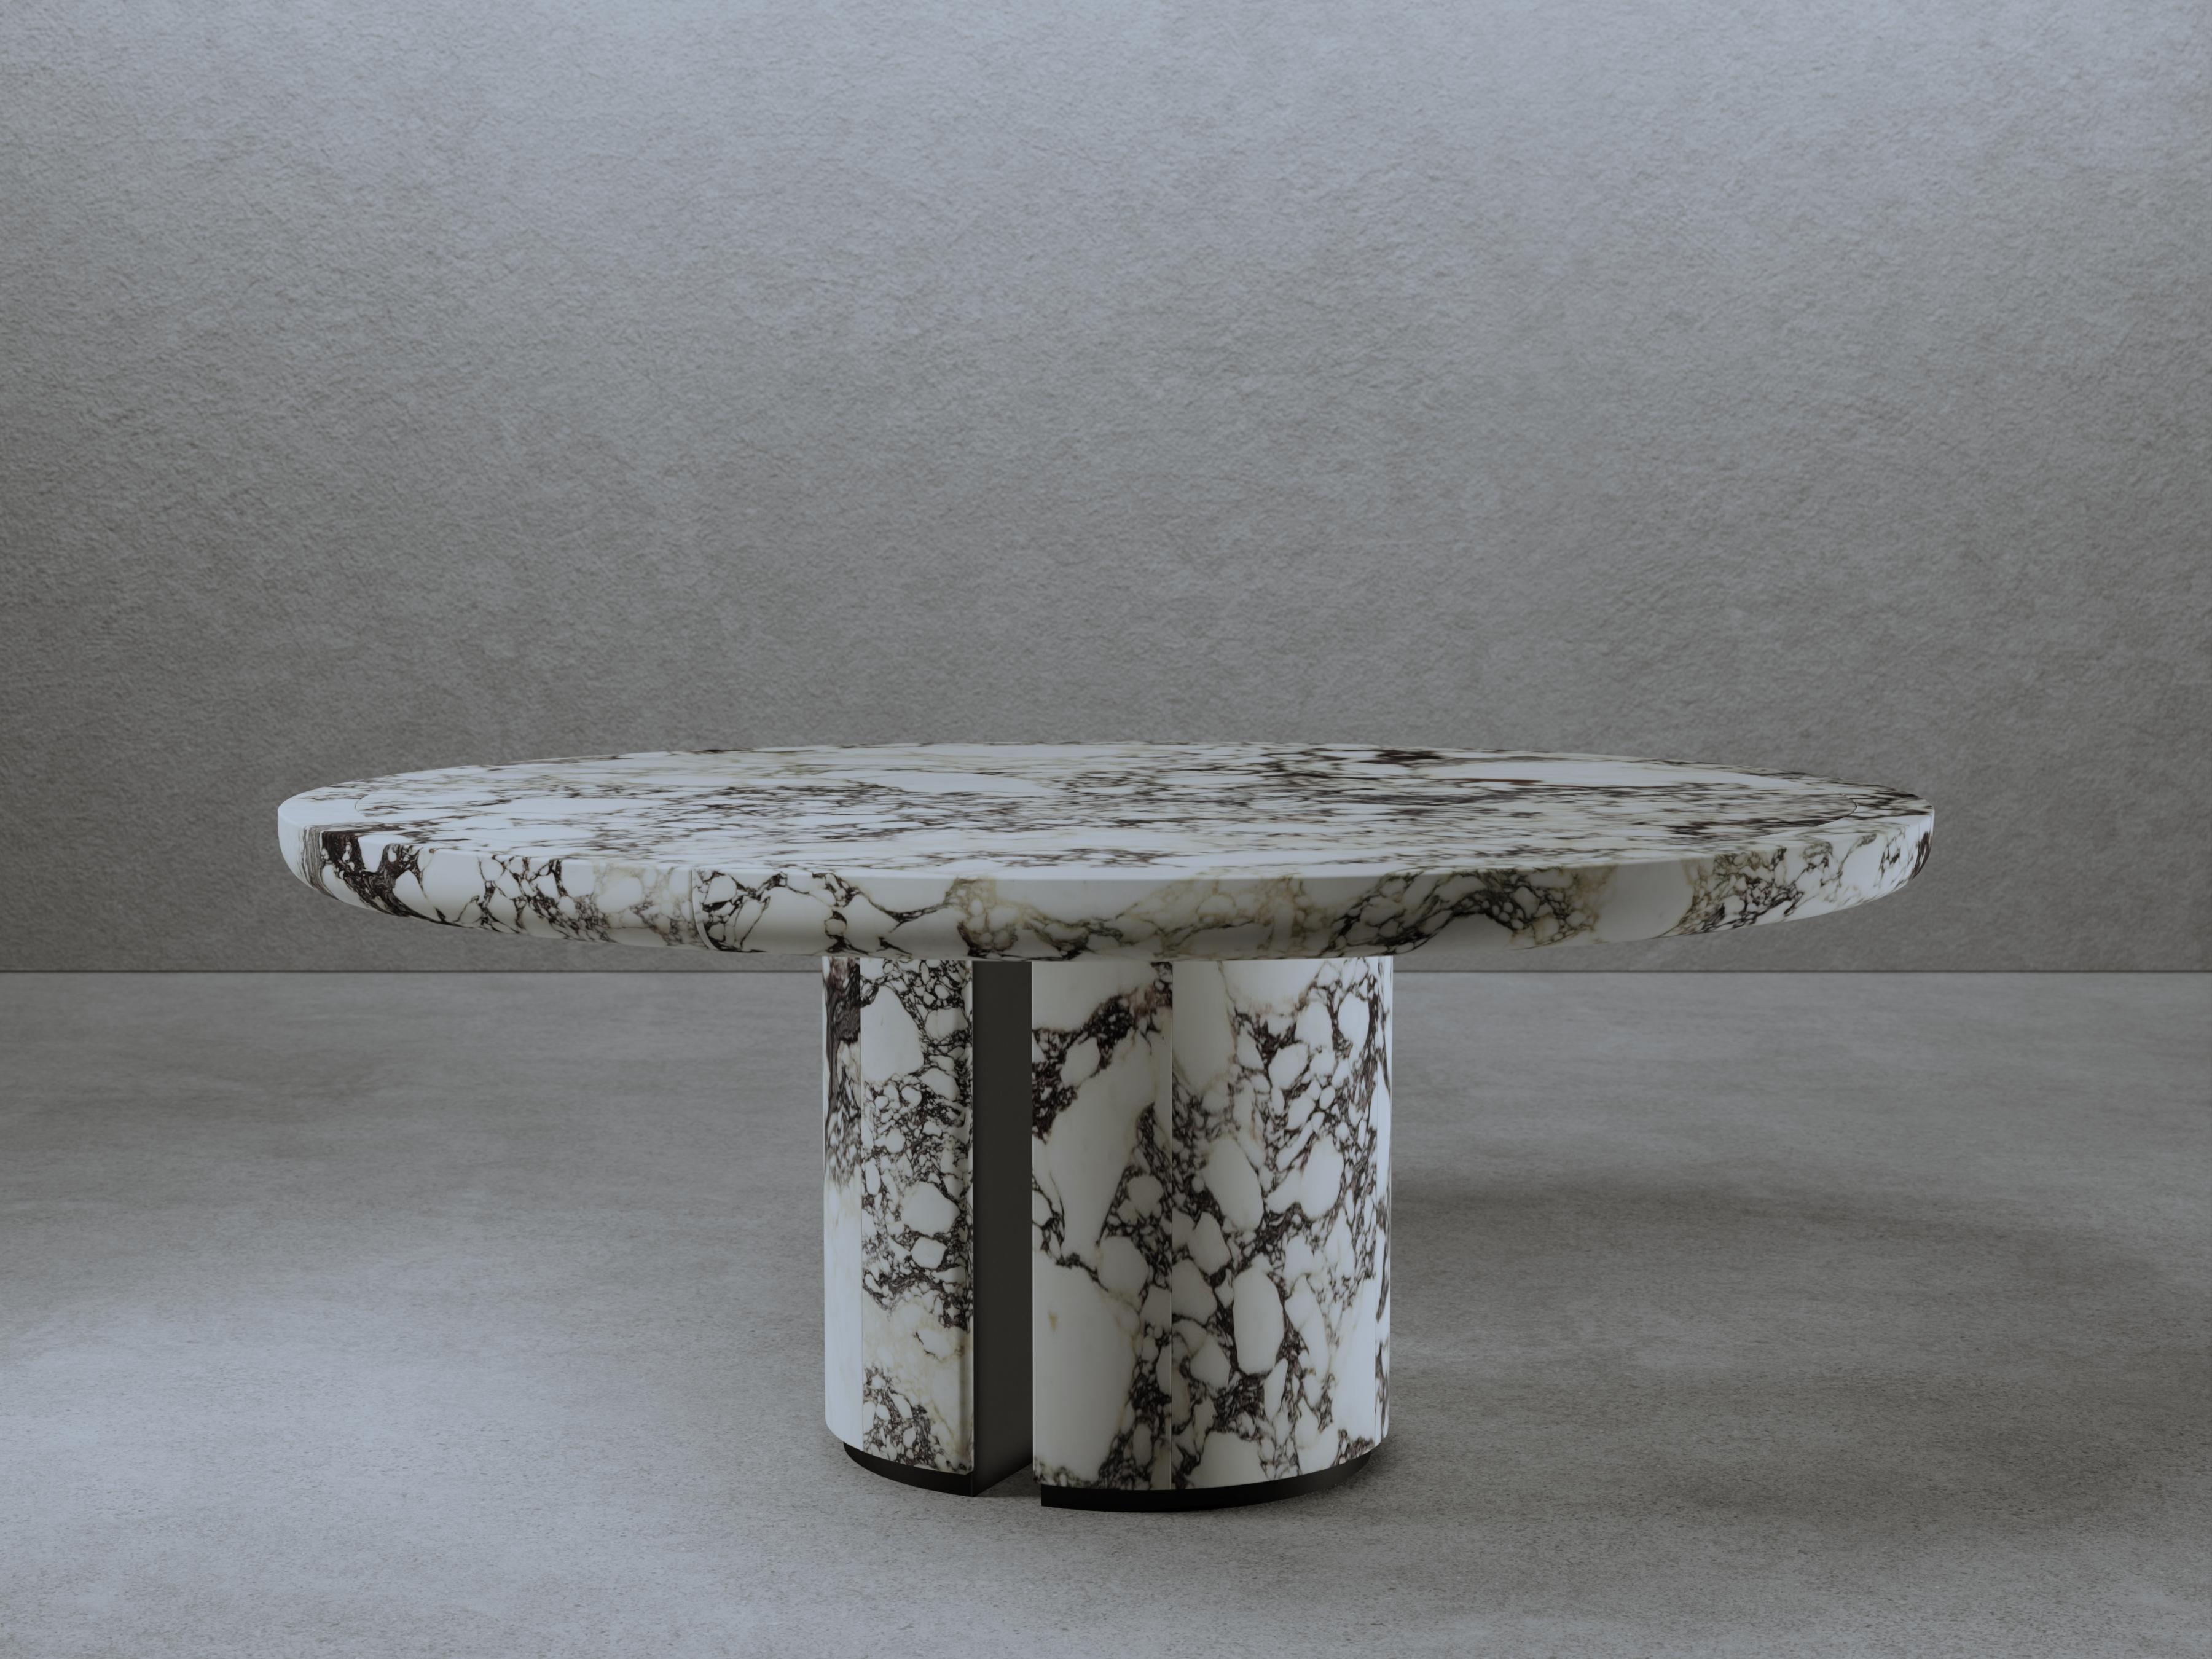 For No One Dining Table by Gio Pagani
Dimensions: Ø 180 x H 74 cm.
Materials: Calacatta Viola Marble and matte black metal.

In a fluid society capable of mixing infinite social and cultural varieties, the nostalgic search for reworked aesthetics